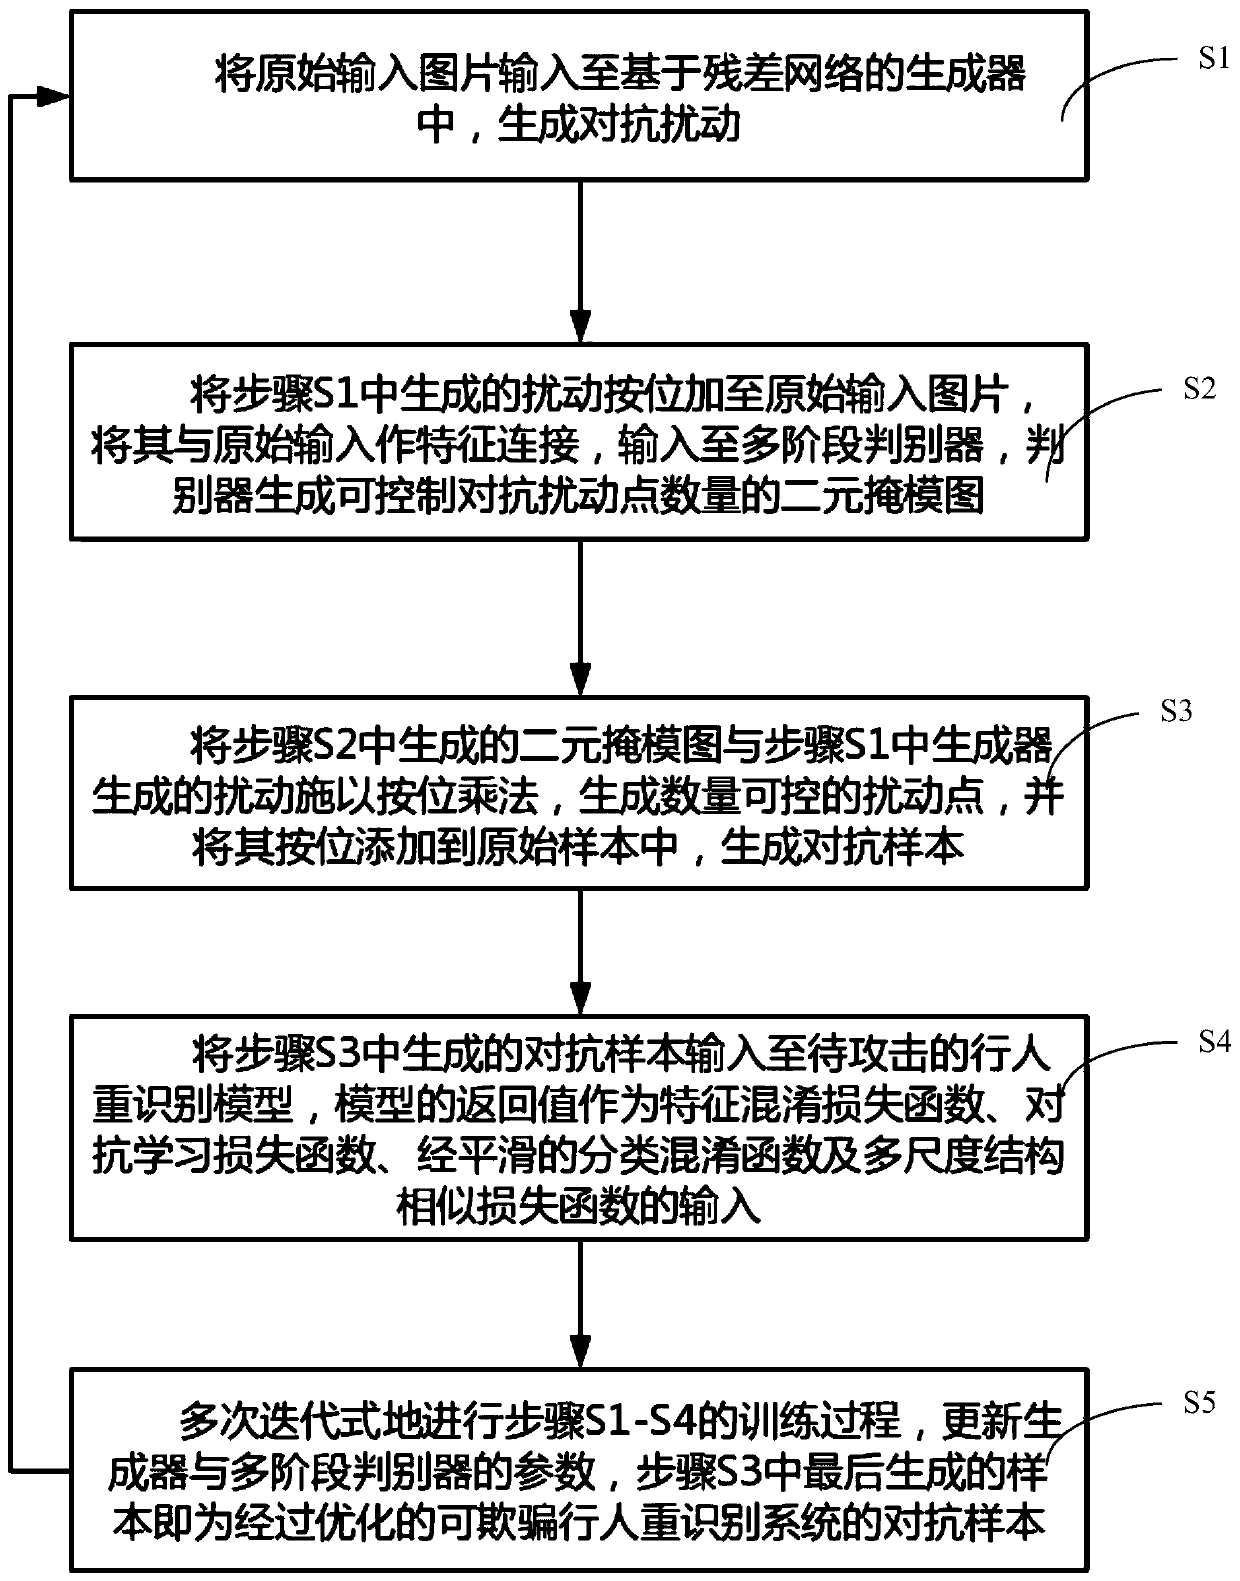 Pedestrian re-identification system adversarial sample generation method and system